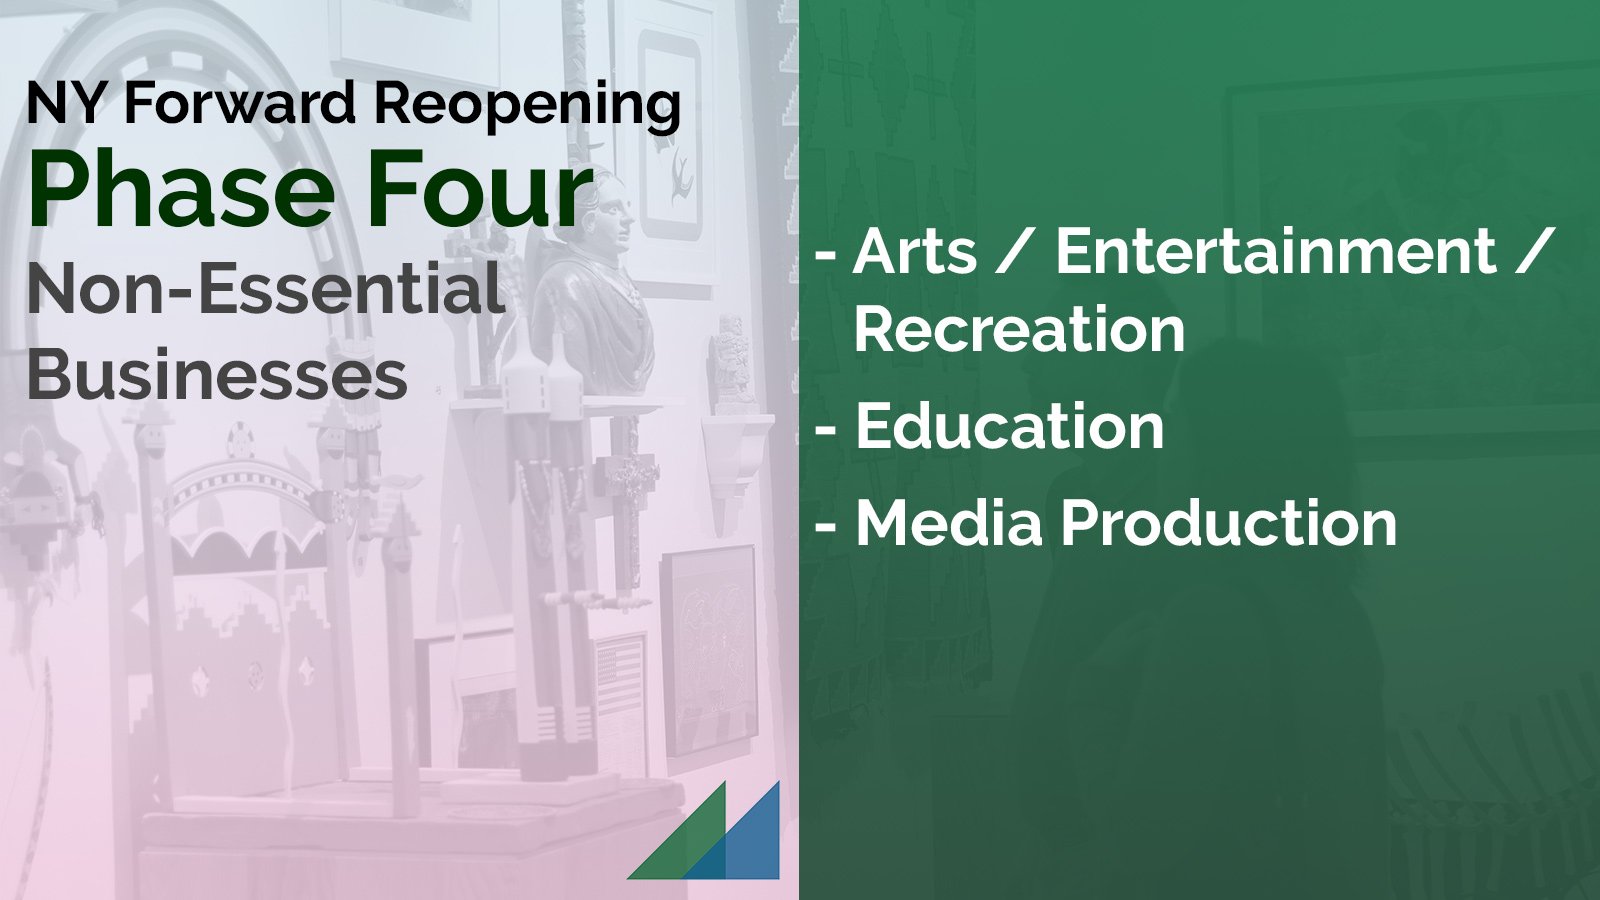 NY Forward Reopening Phase Four: Arts / Entertainment / Recreation, Education, and Media Production